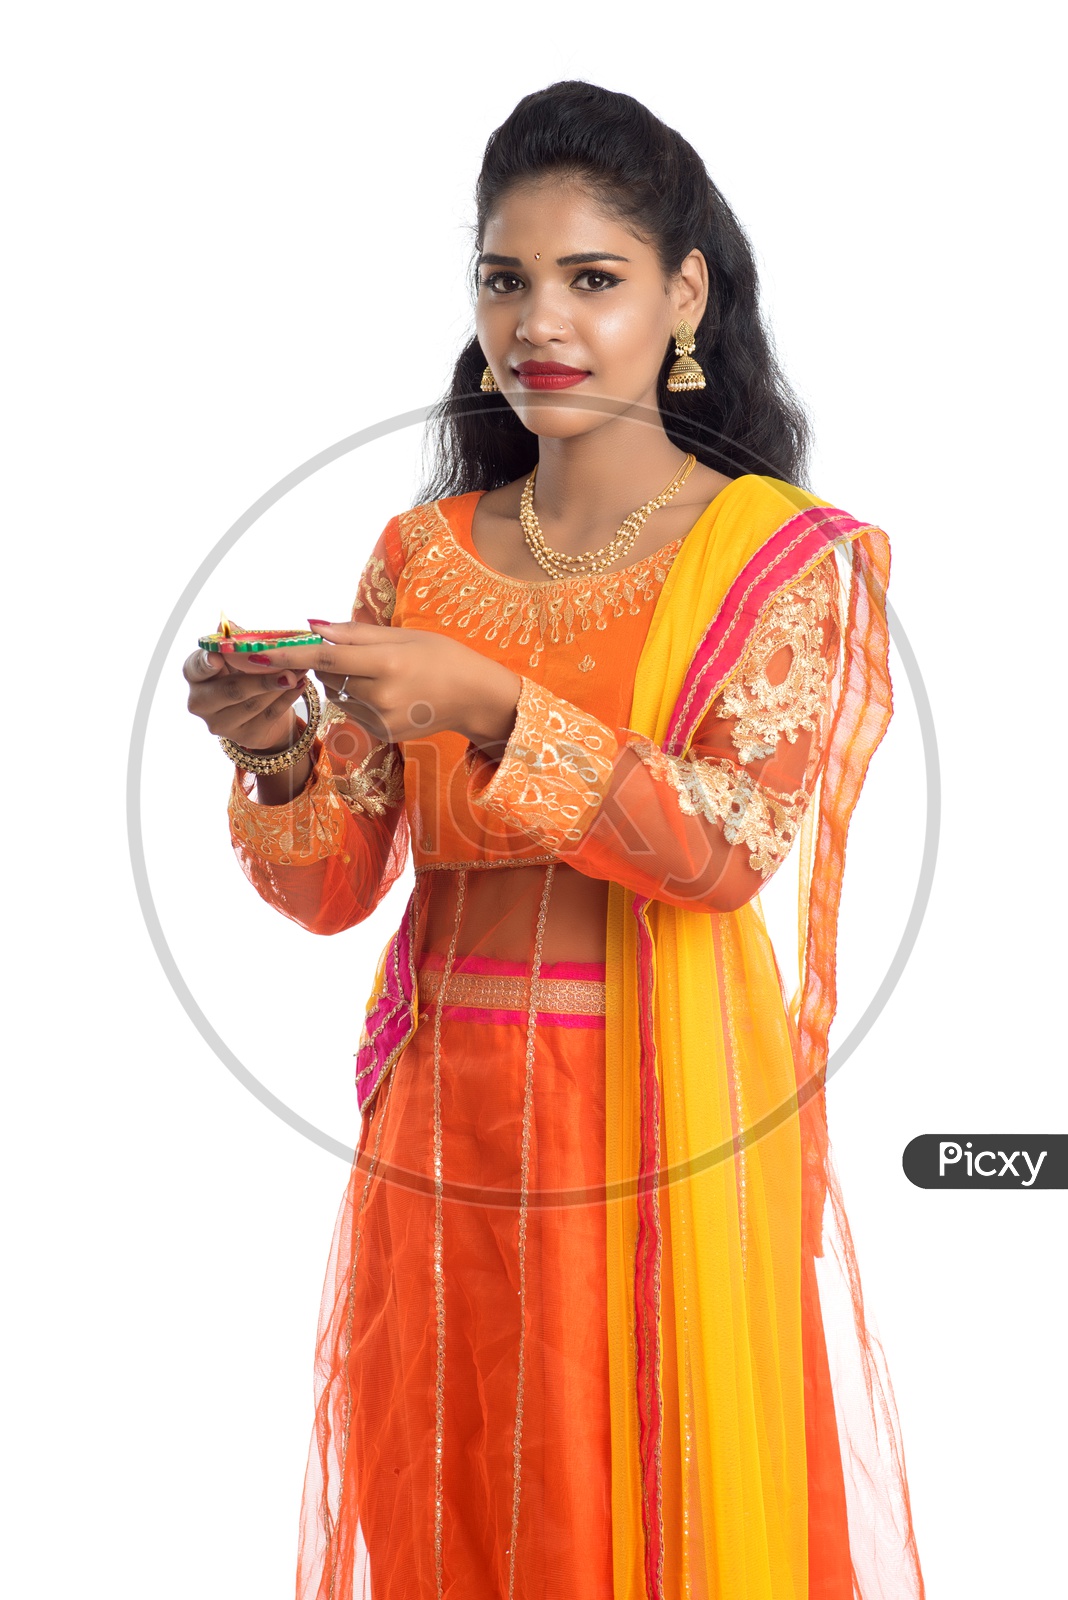 A young traditional pretty Indian woman holding diya in hand